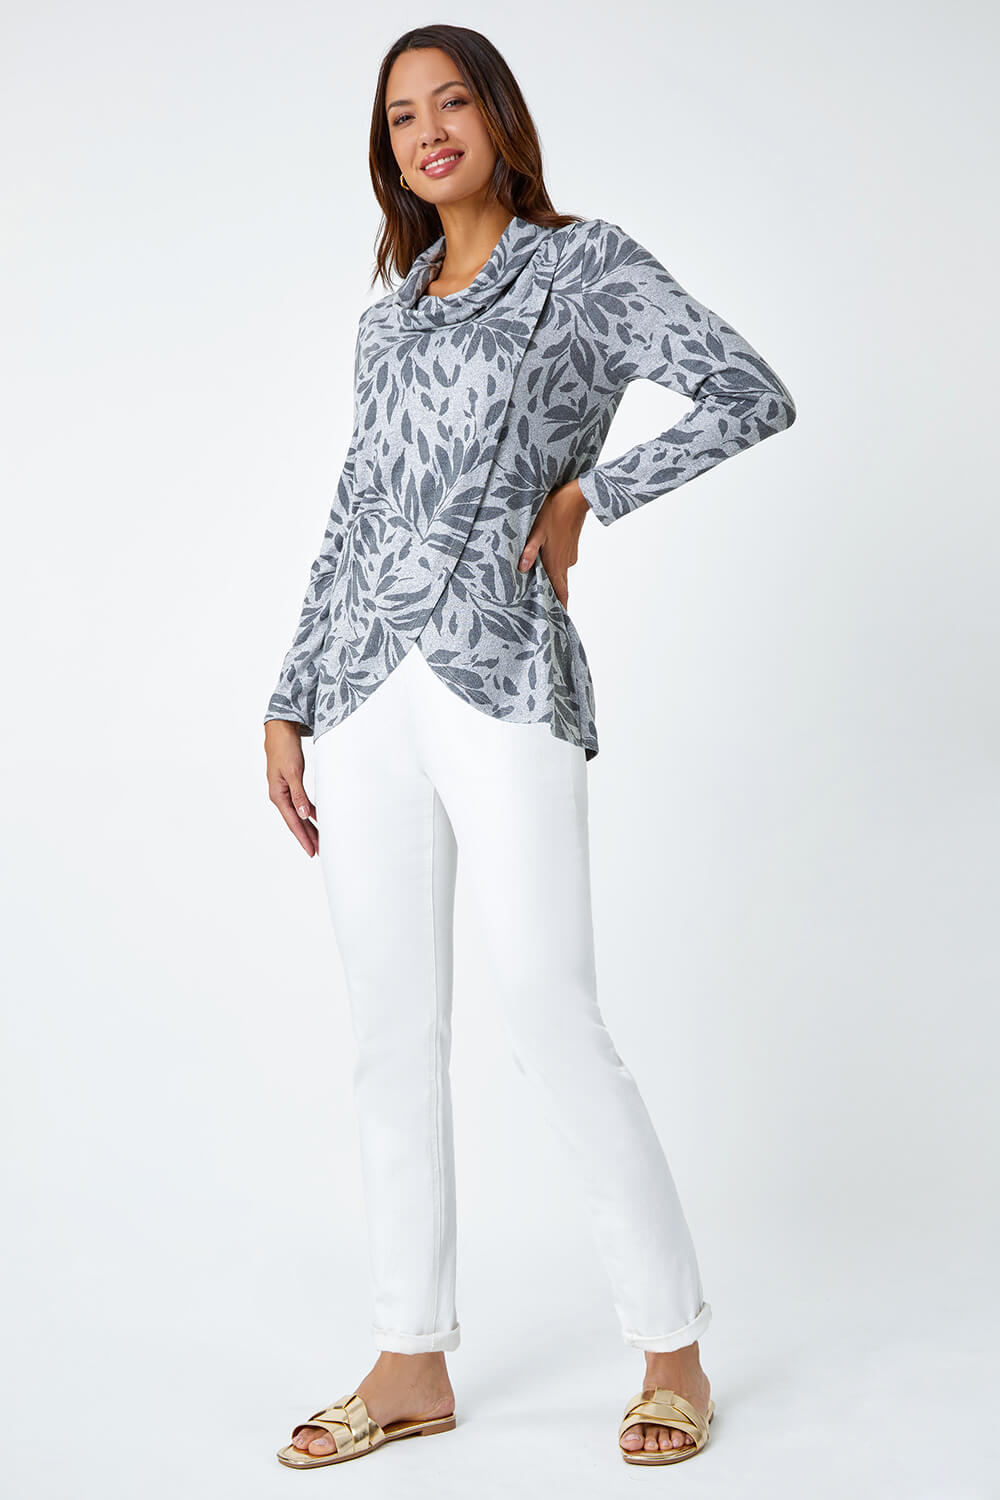 Grey Floral Print Cowl Neck Stretch Top , Image 2 of 5